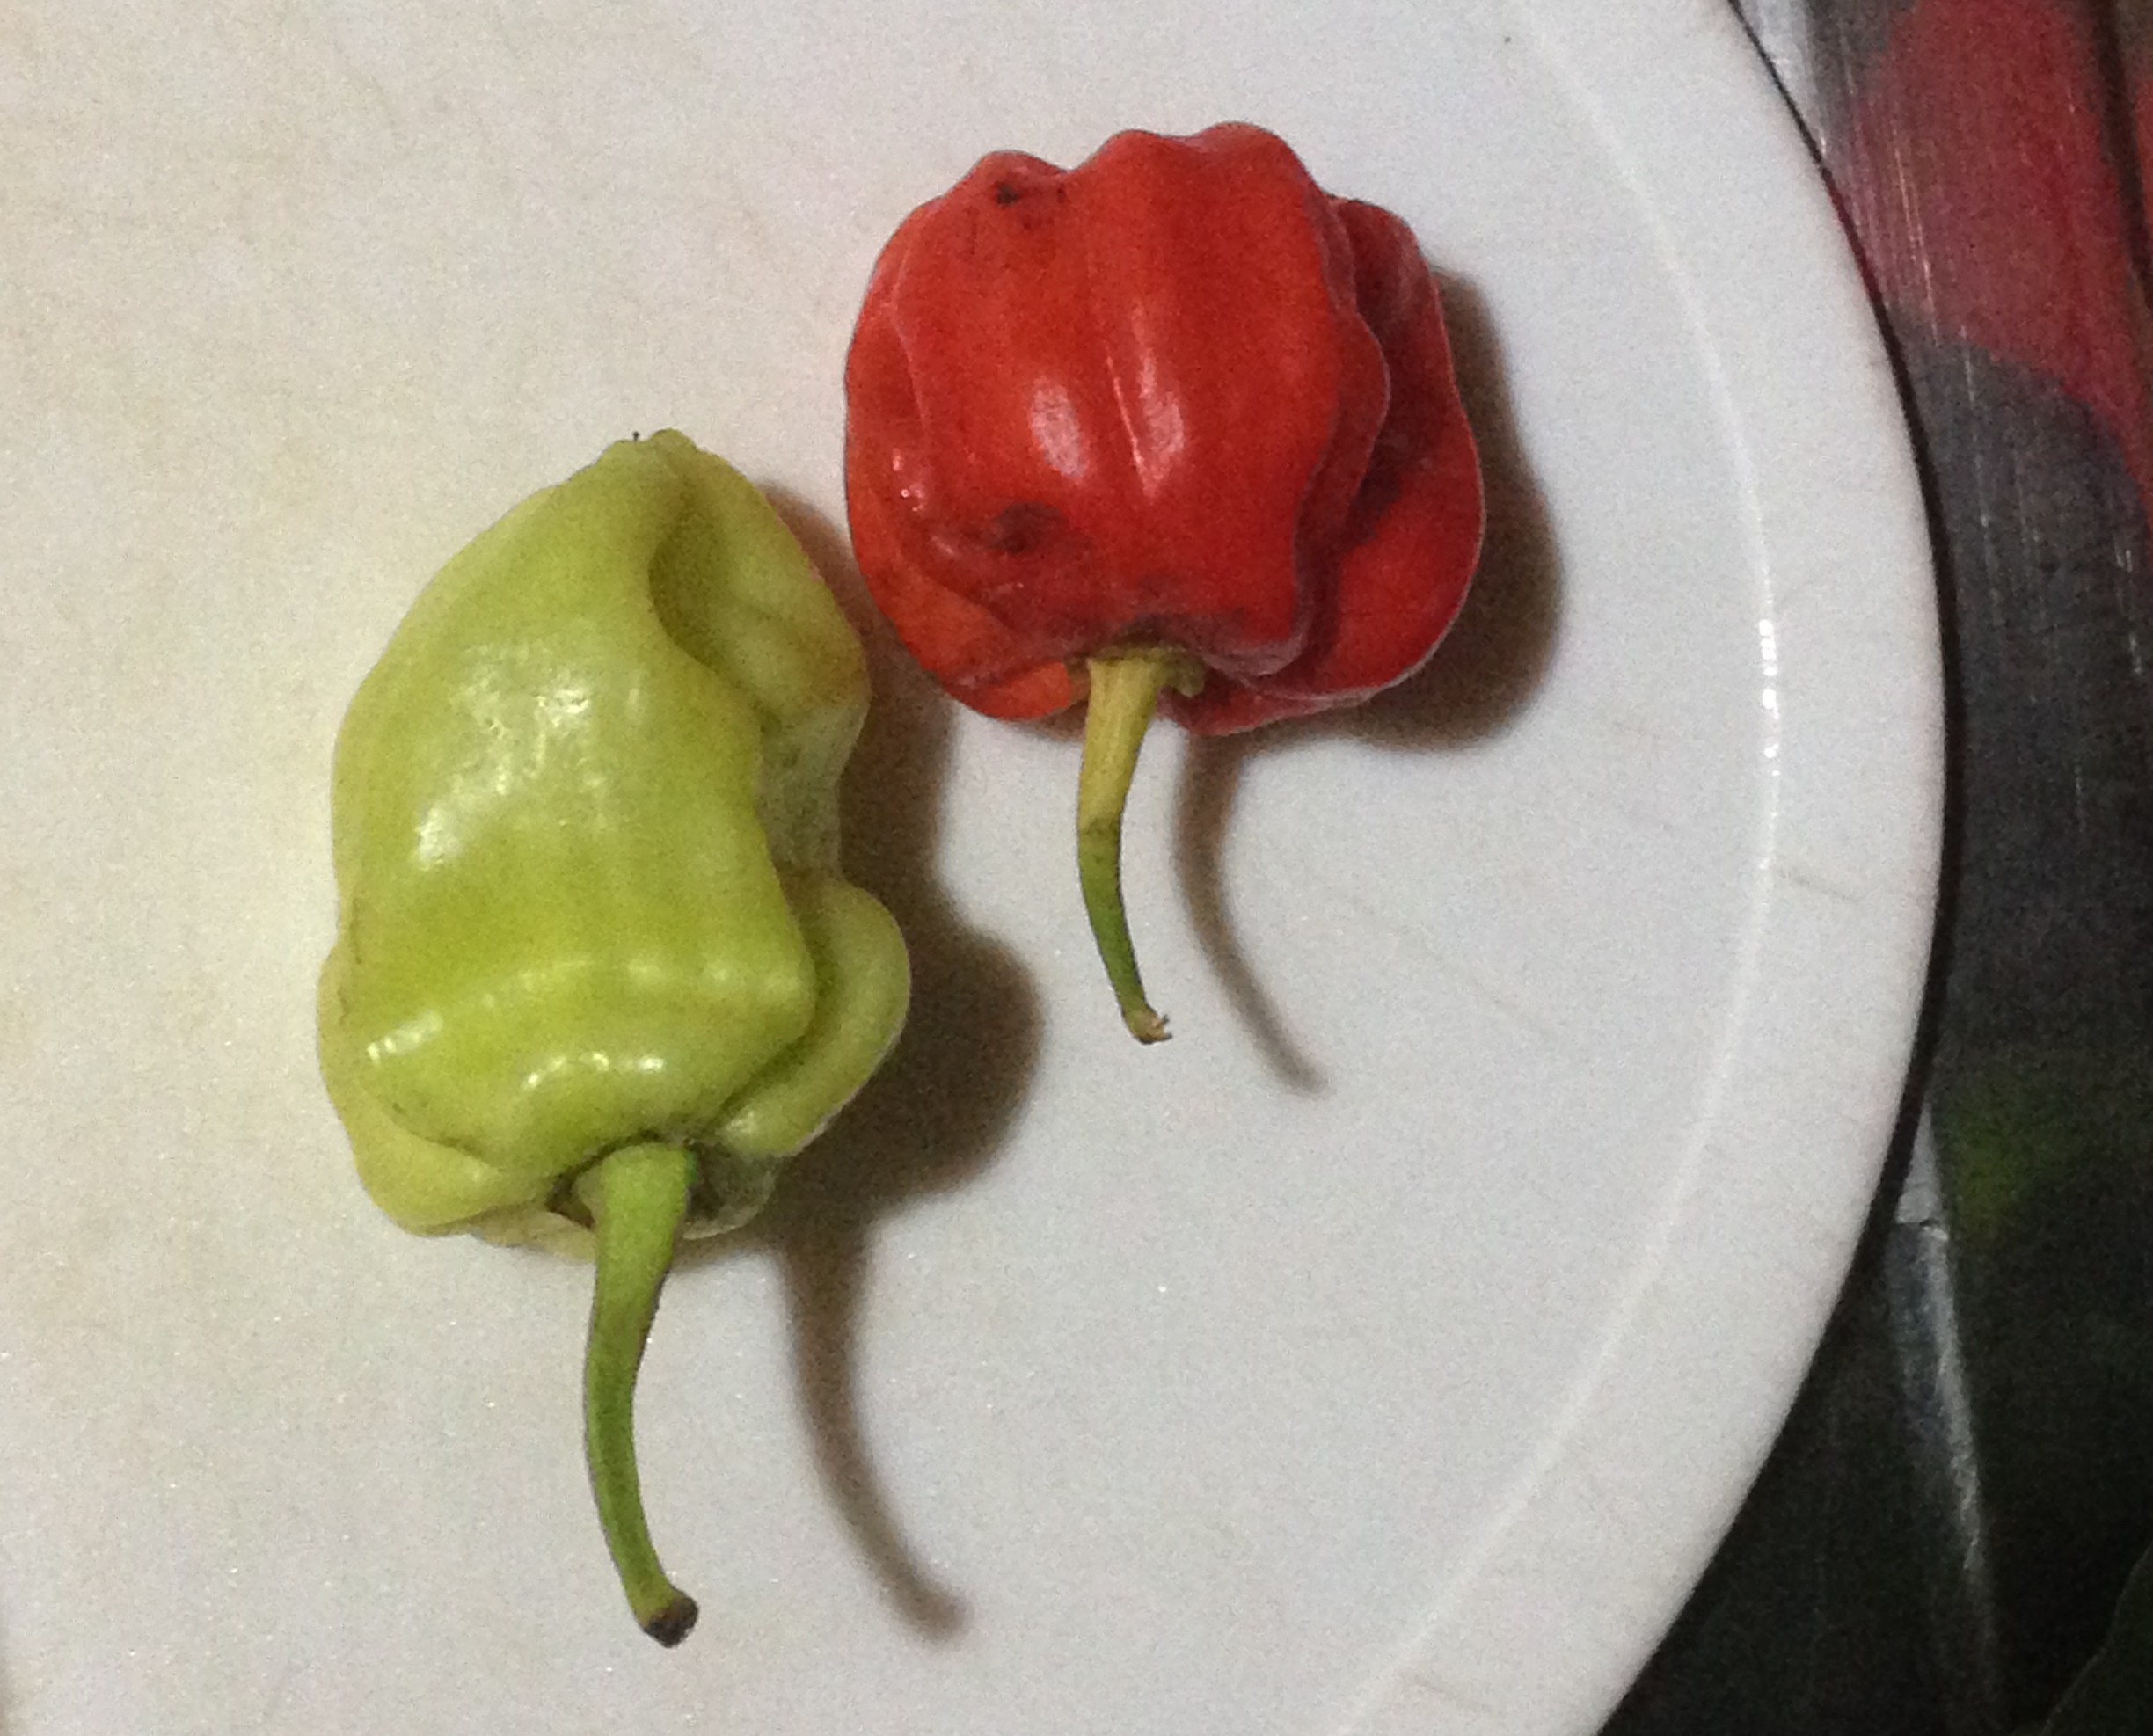 hot peppers